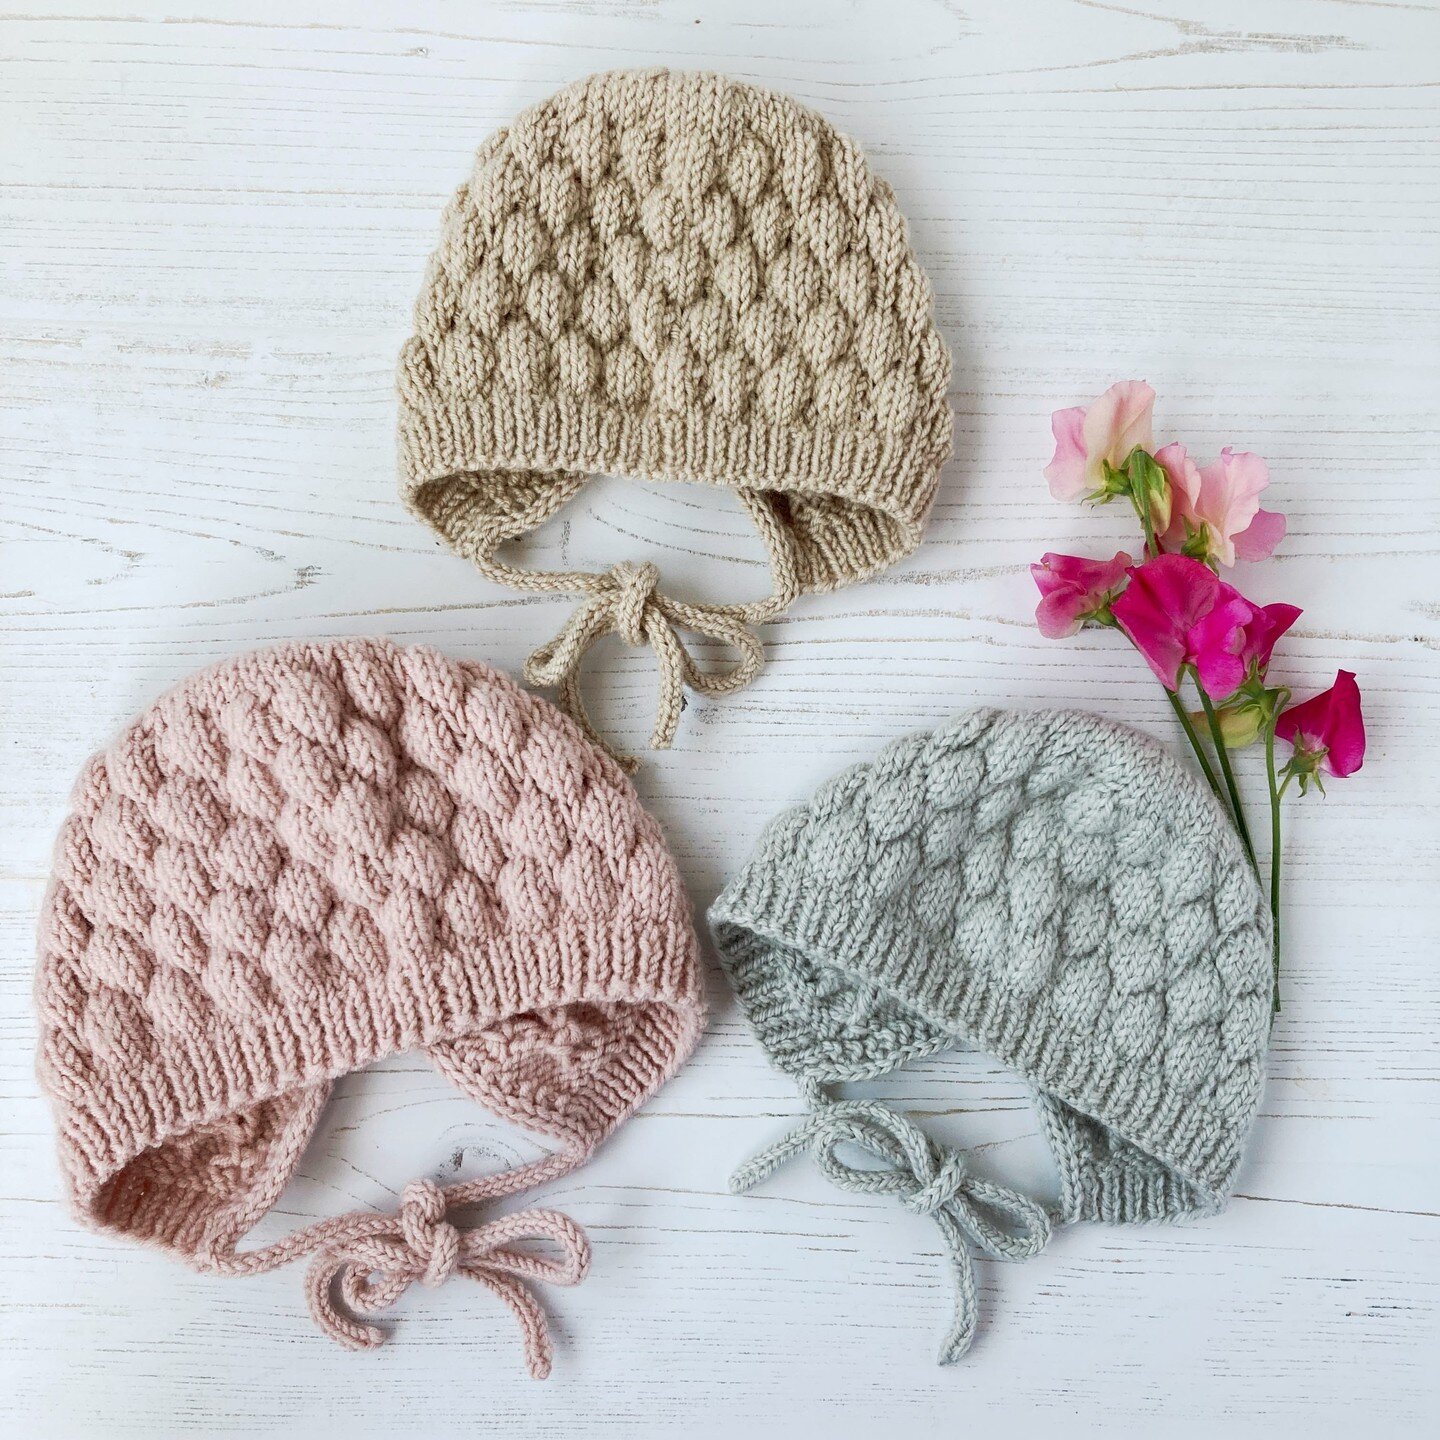 This is wishful thinking .... my sweet peas are not in flower yet, but they won't be long.⁣
Bubble stitch bonnet pattern in beautiful pastel shades.⁣
#lovefibrespattern #lovefibres #knittingpattern #bubblestitch #bubblestitchknittingpattern #bubblest